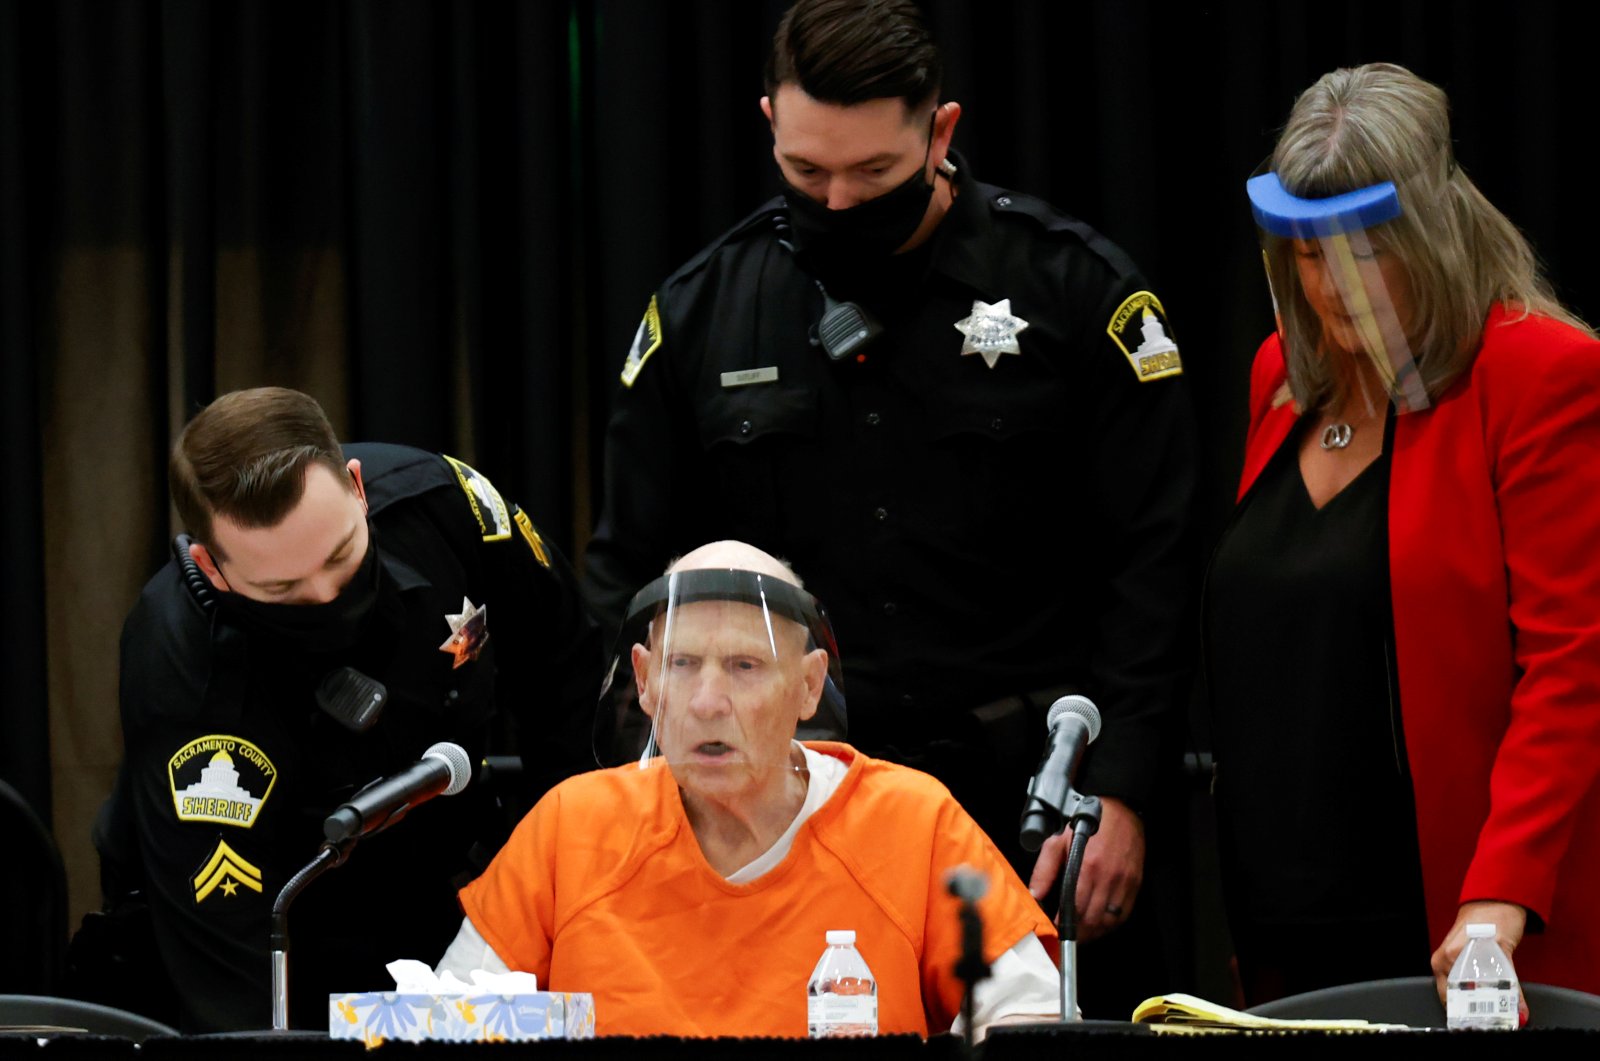 Former police officer Joseph James DeAngelo Jr. attends a hearing on crimes attributed to the "Golden State Killer" at the Sacramento County courtroom, Sacramento, California, June 29, 2020. (REUTERS Photo)